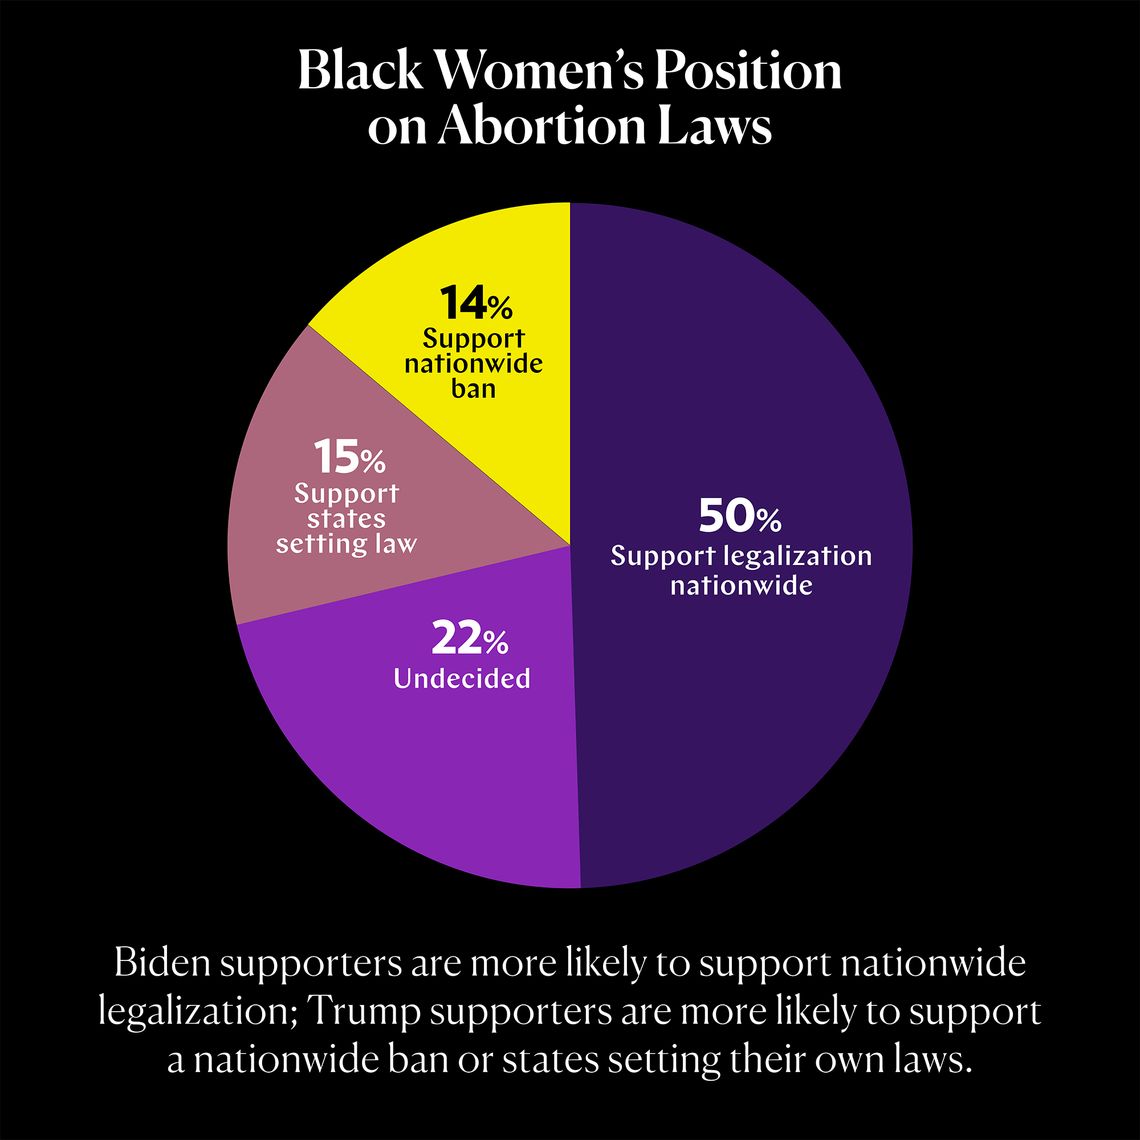 A pie chart showing black women's position on abortion laws.